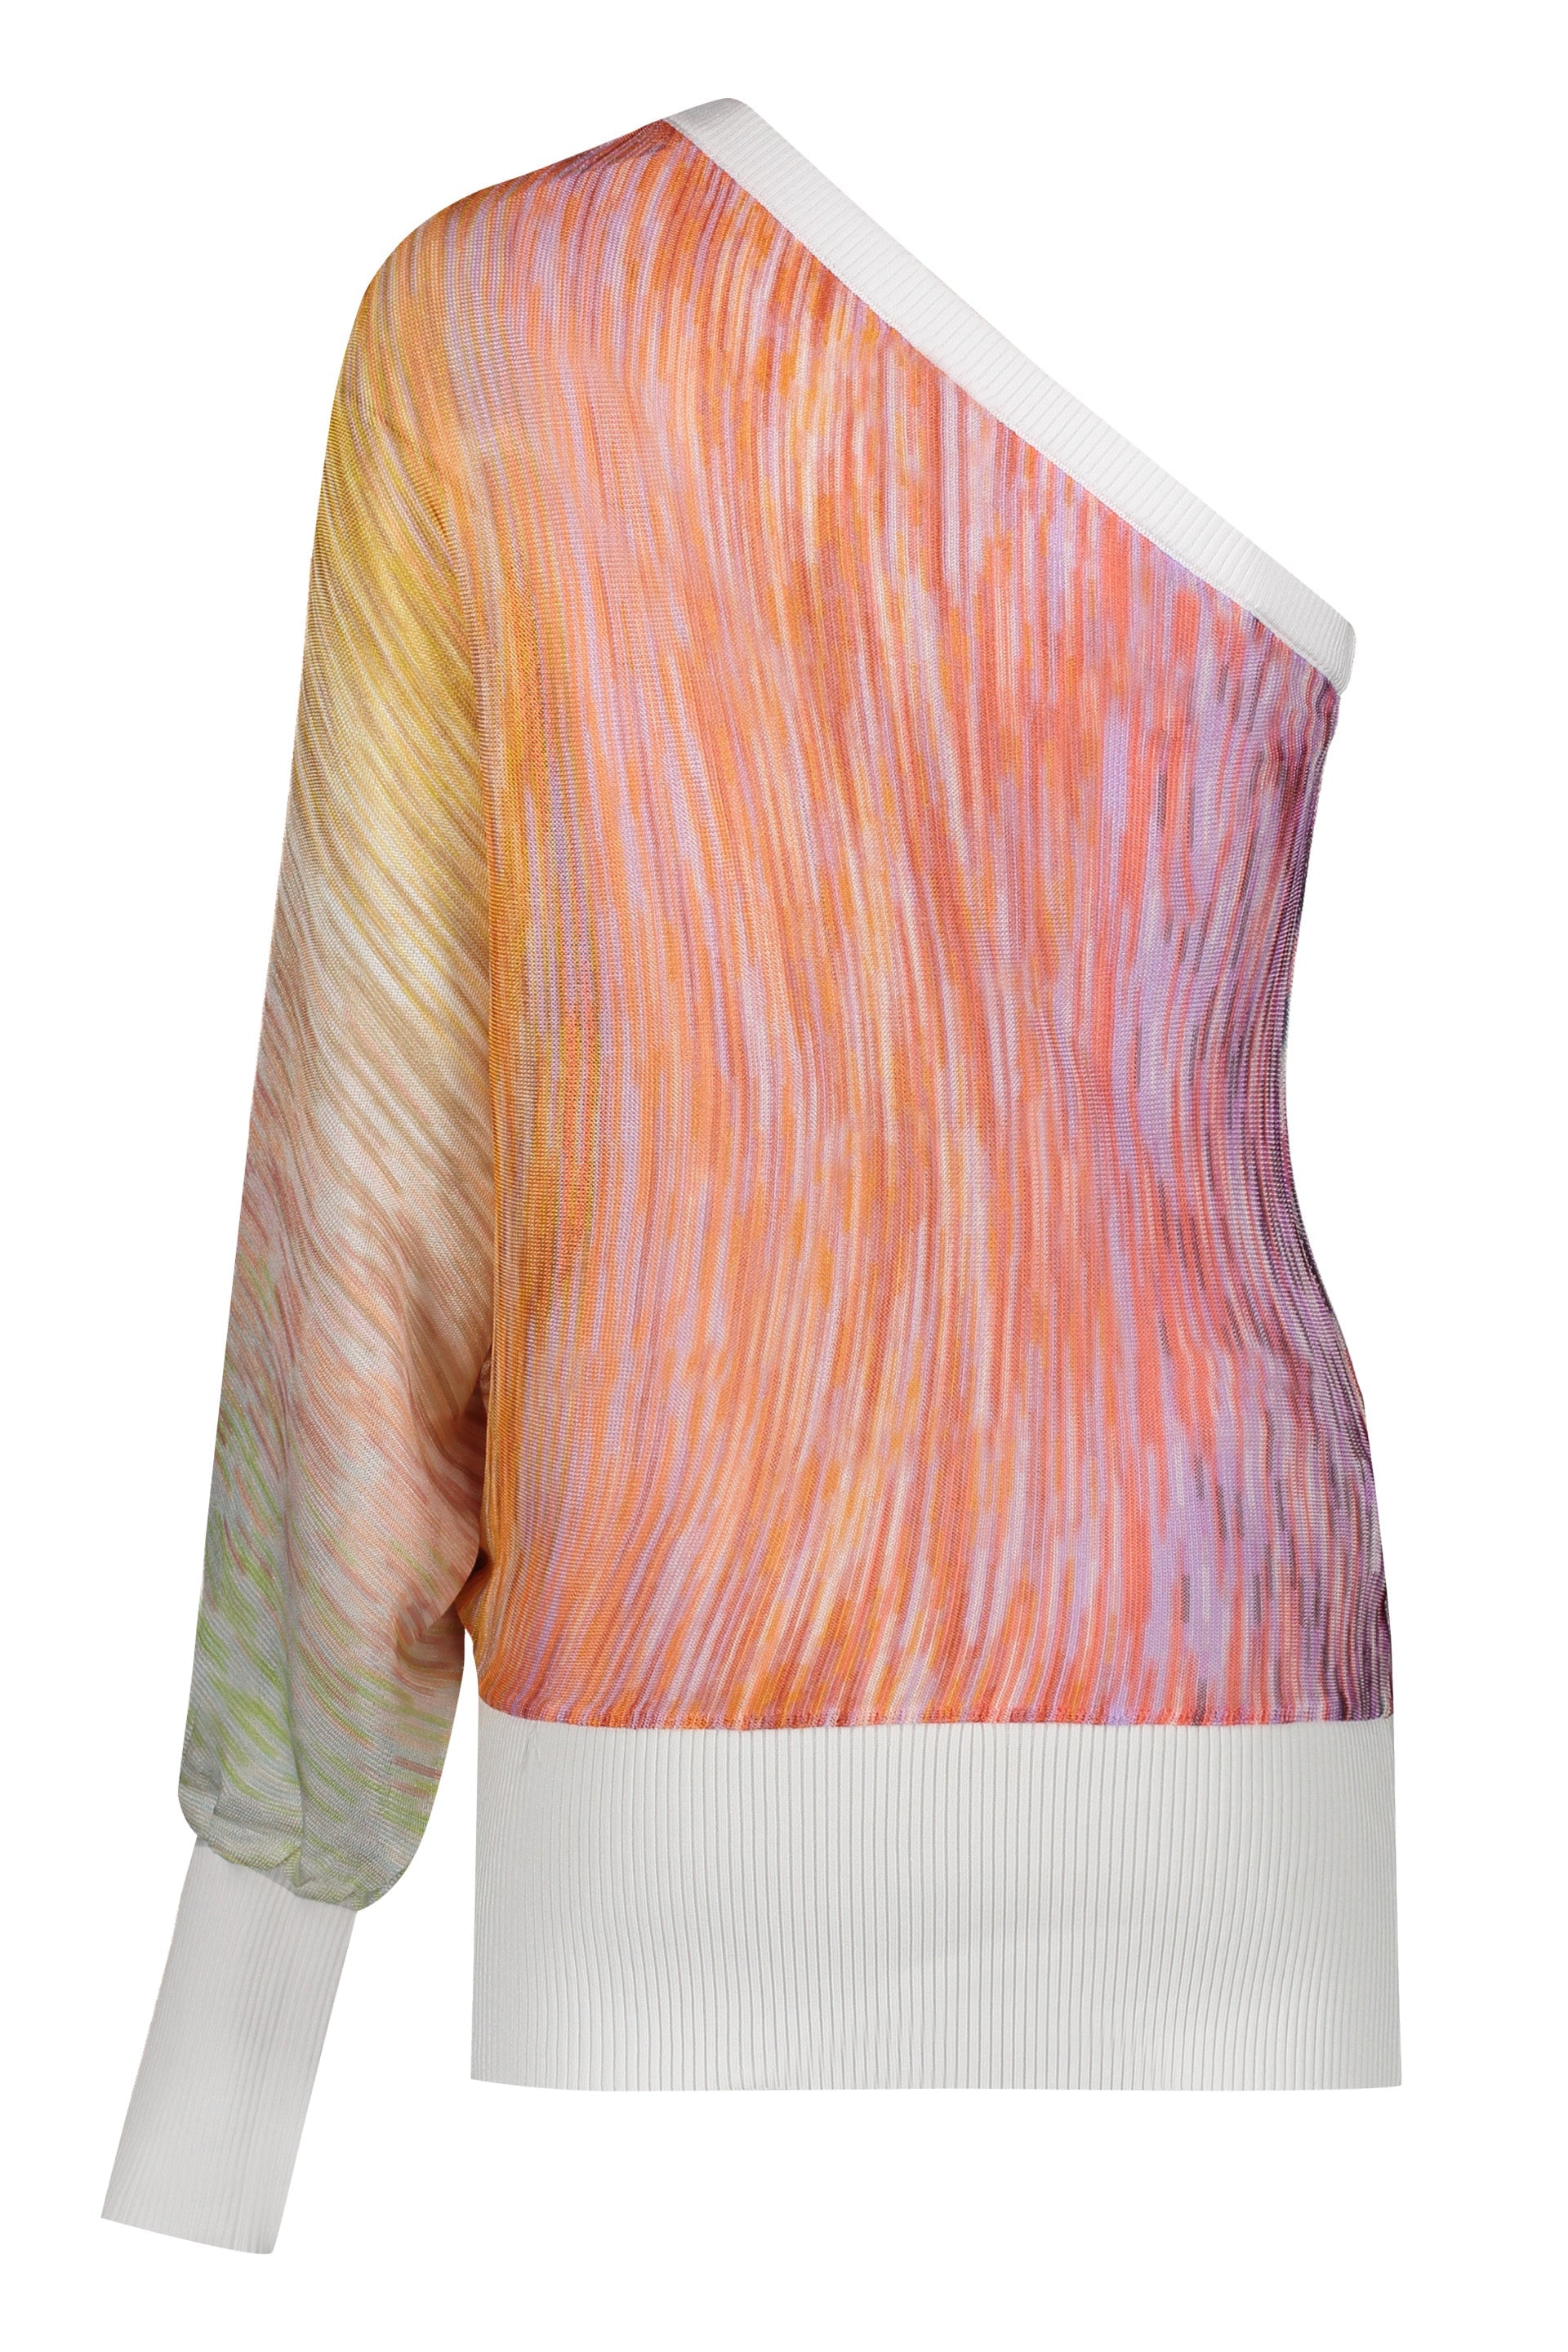 Missoni-OUTLET-SALE-Knitted-one-shoulder-top-Shirts-ARCHIVE-COLLECTION-2.jpg